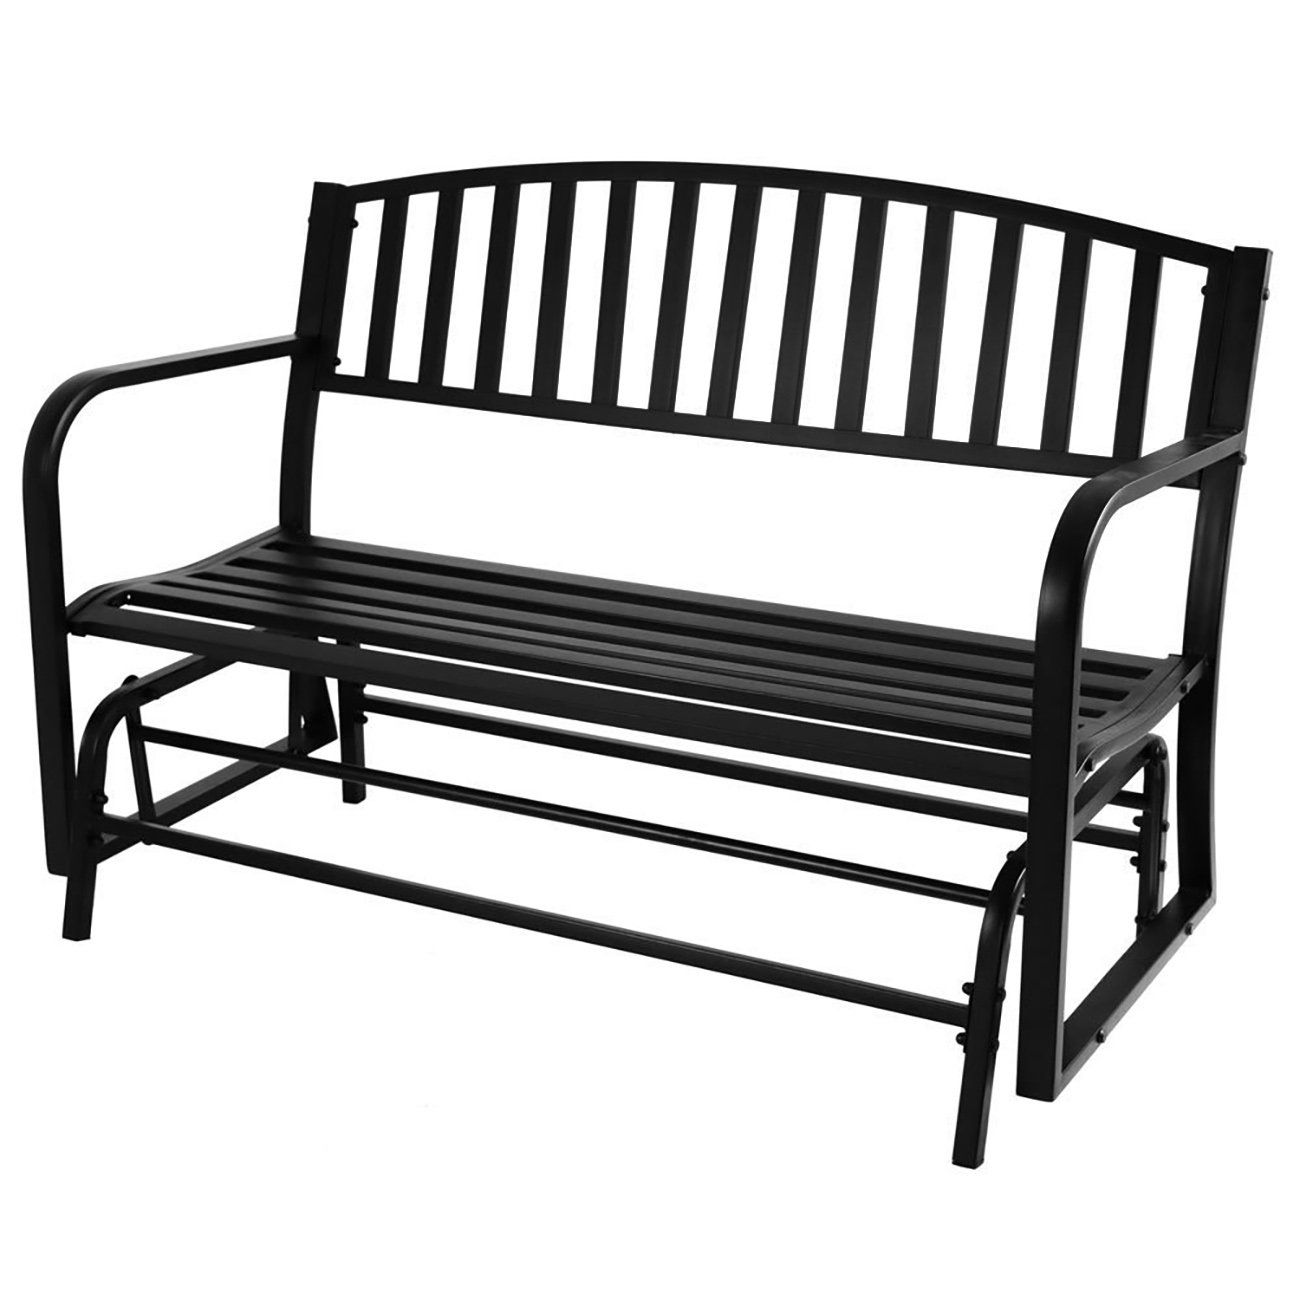 Cheap Patio Furniture Glider Bench, Find Patio Furniture For Black Outdoor Durable Steel Frame Patio Swing Glider Bench Chairs (View 2 of 25)